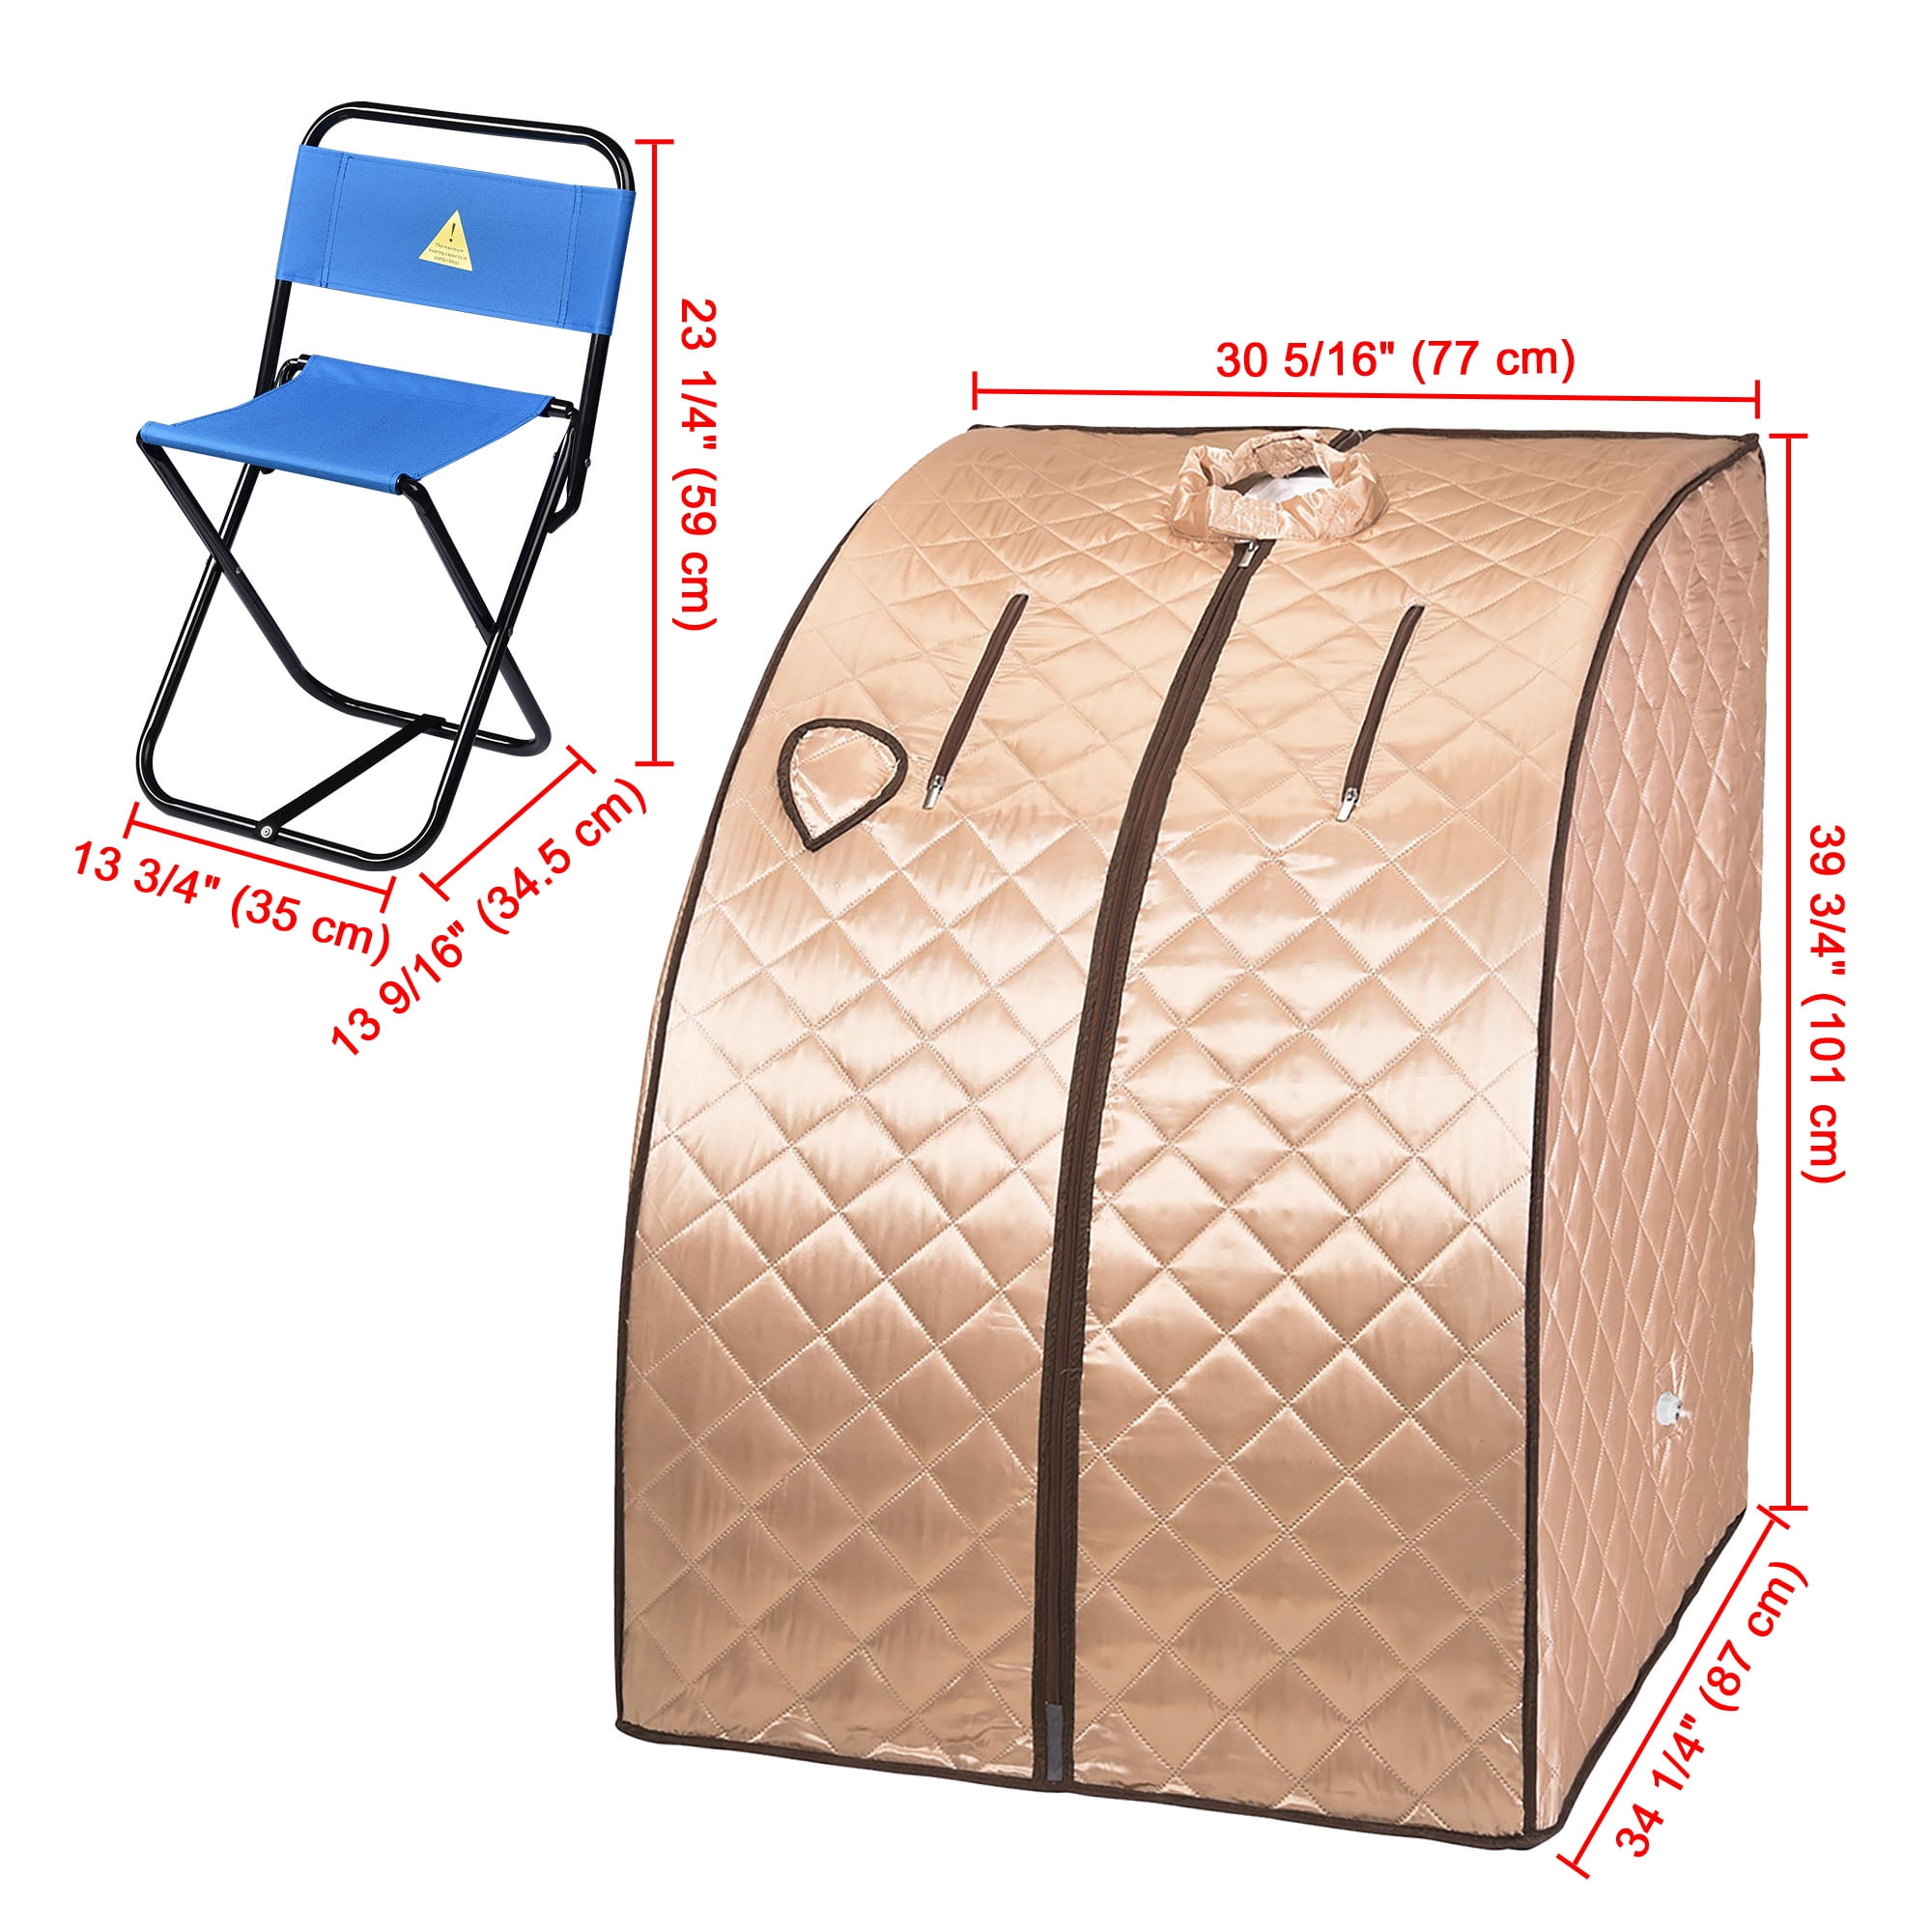 Details about   2L Portable Folding Home Steam Sauna SPA Loss Weight Detox Therapy Bodyslim c 59 